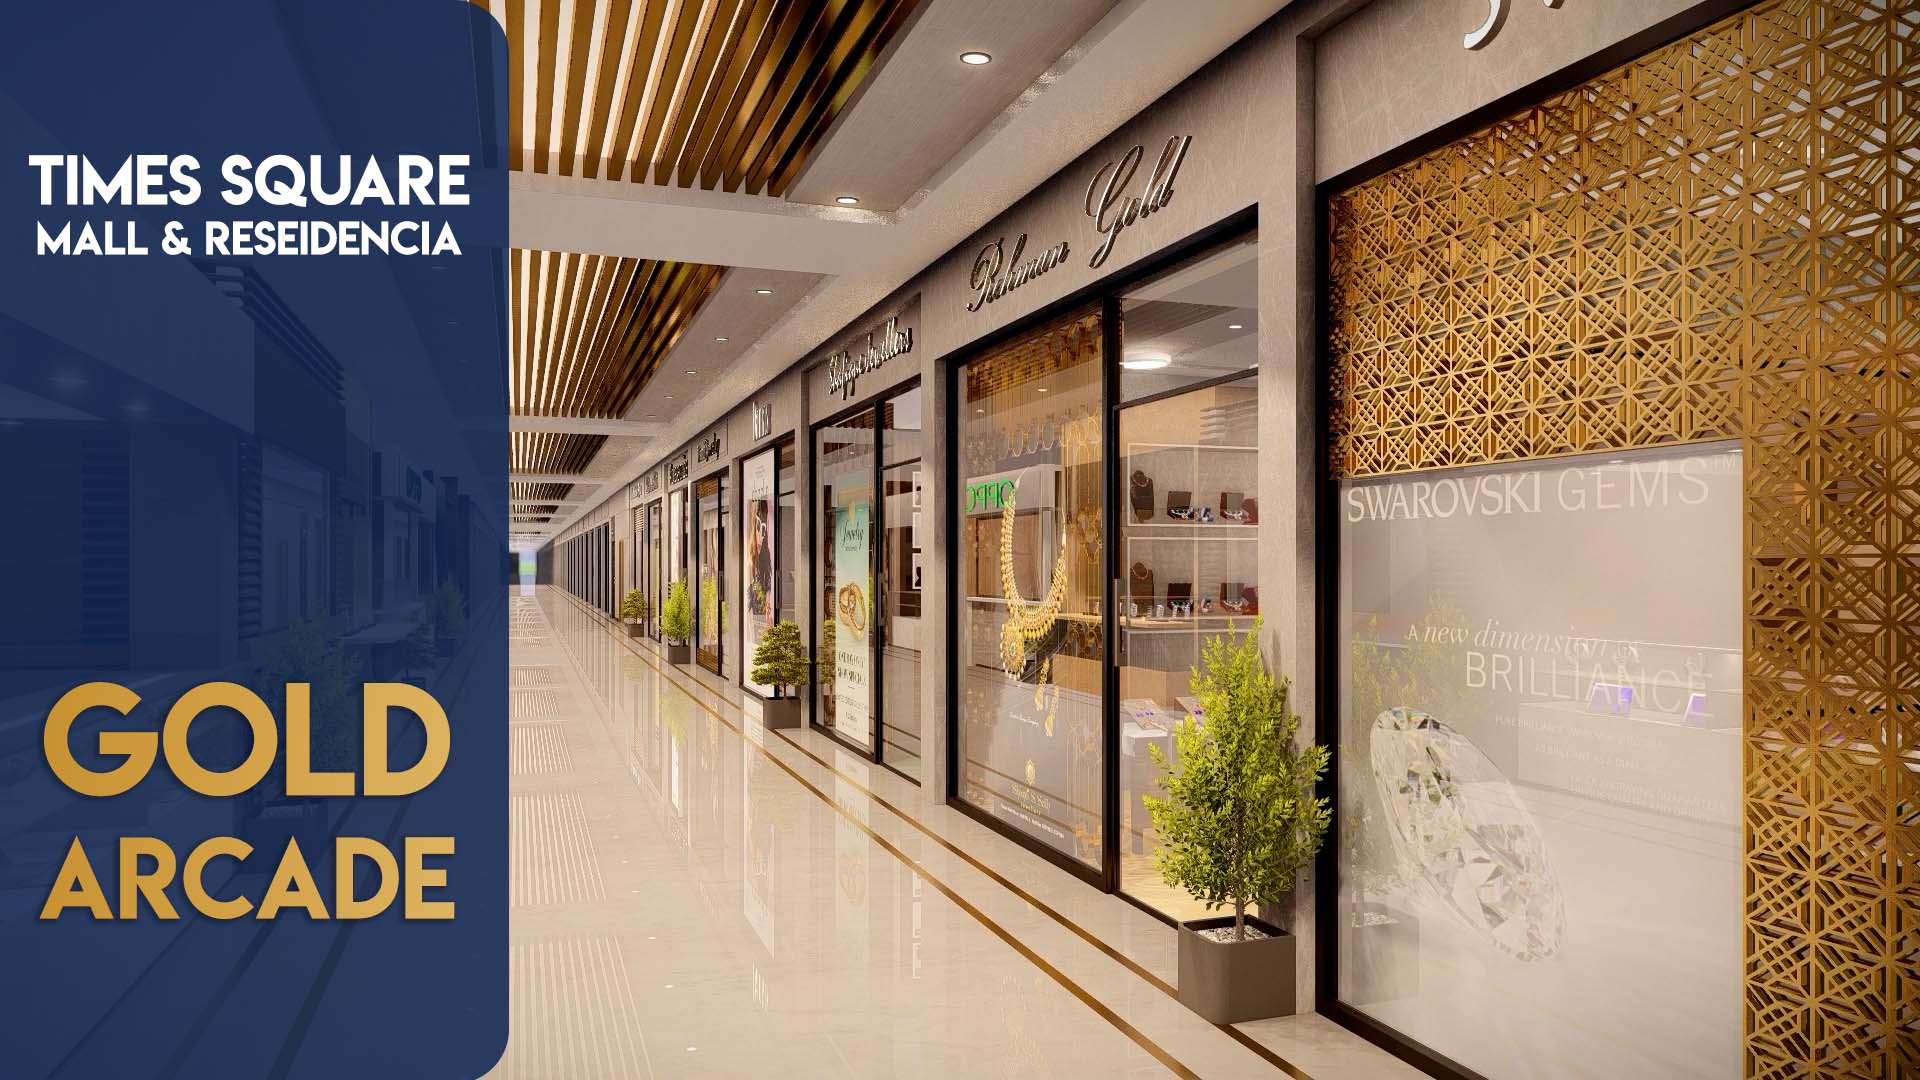 Introducing GOLD ARCADE at Time Square Mall & Residencia, Lahore